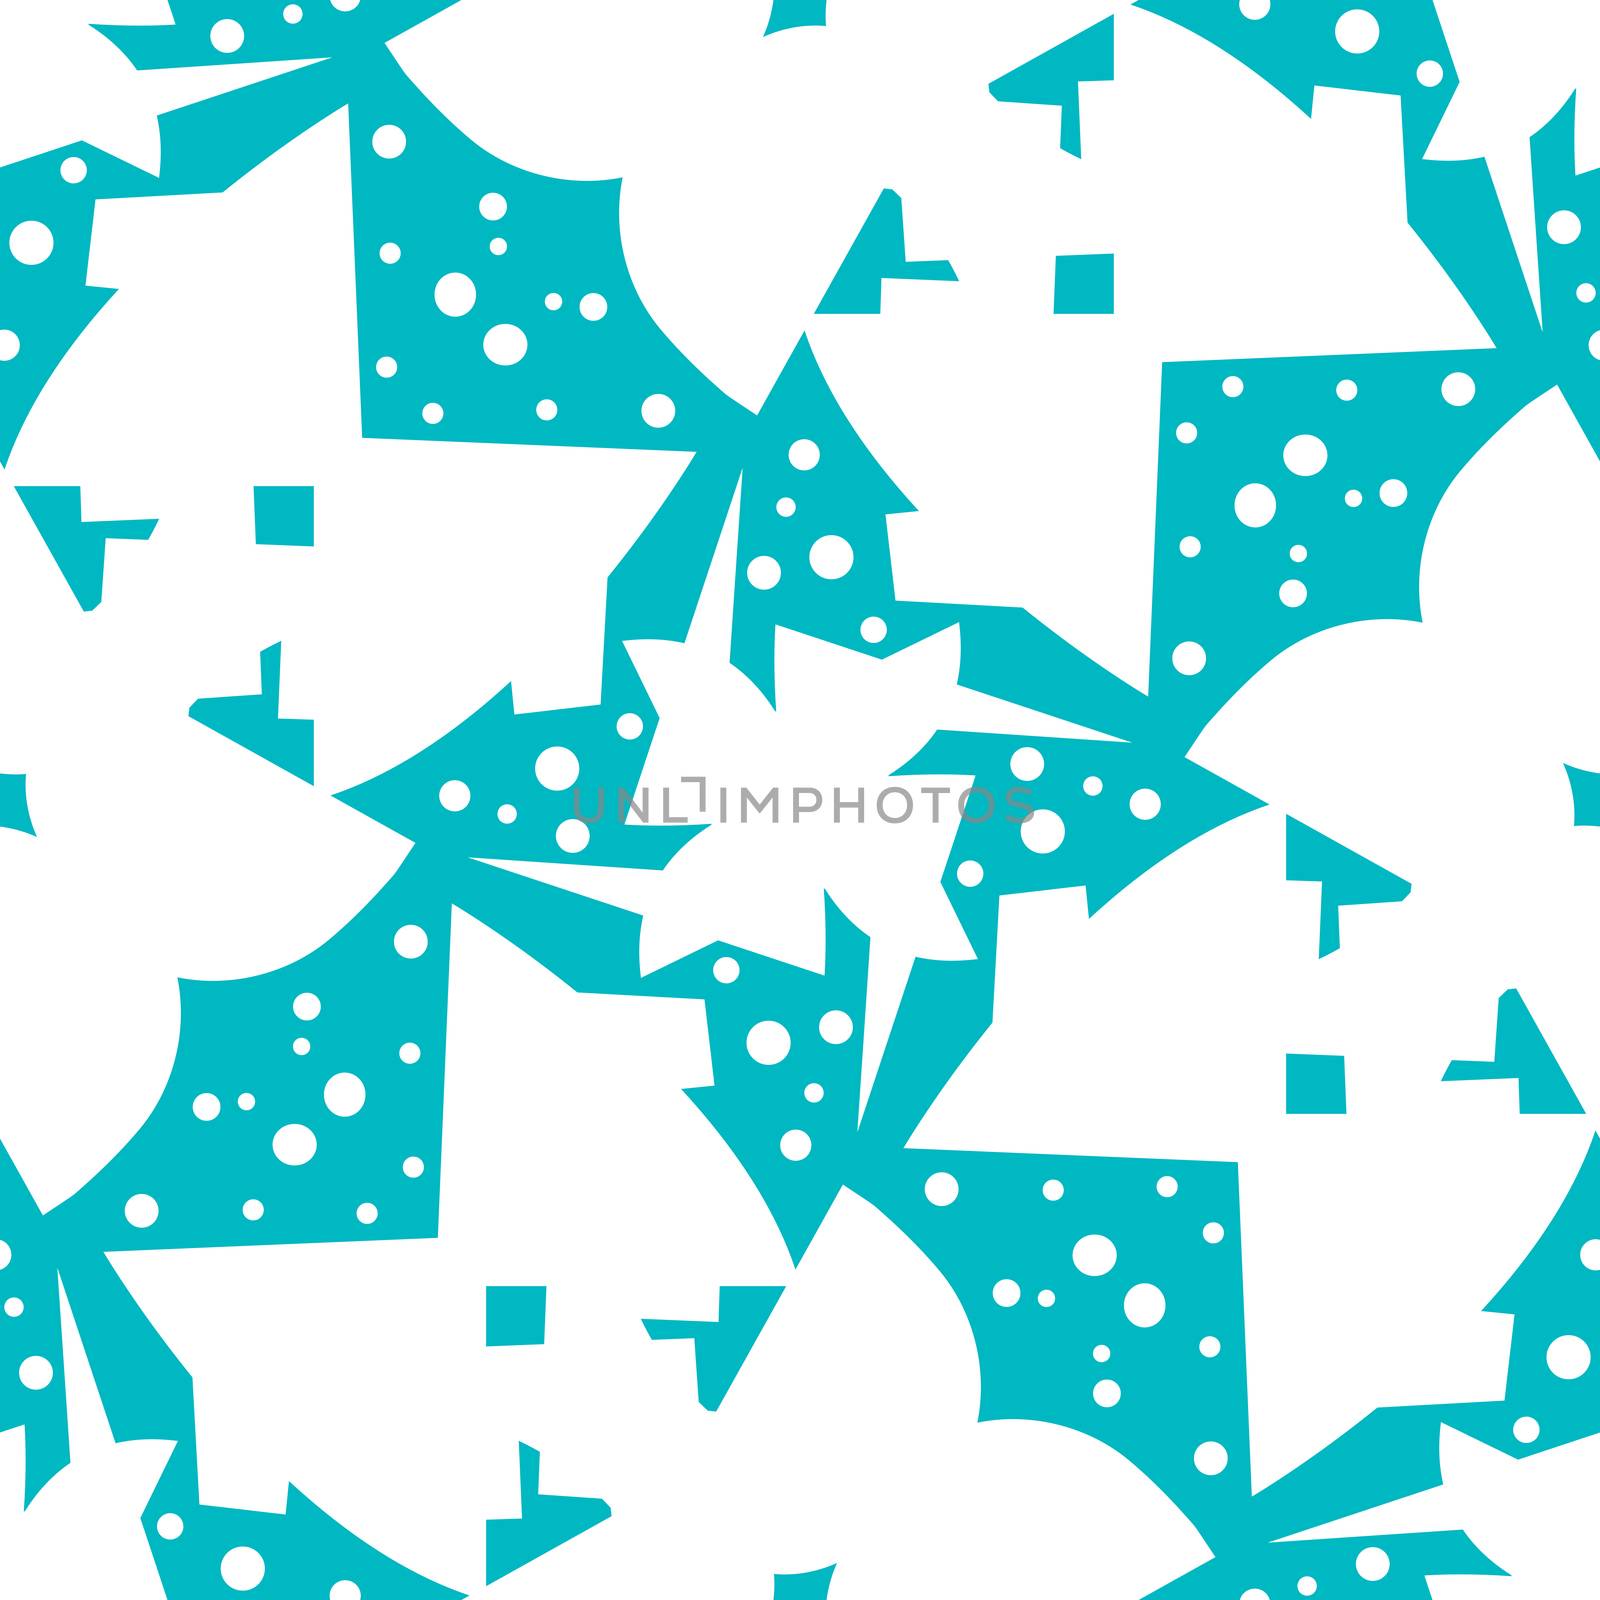 Background pattern of seamless abstract butterflies over blue